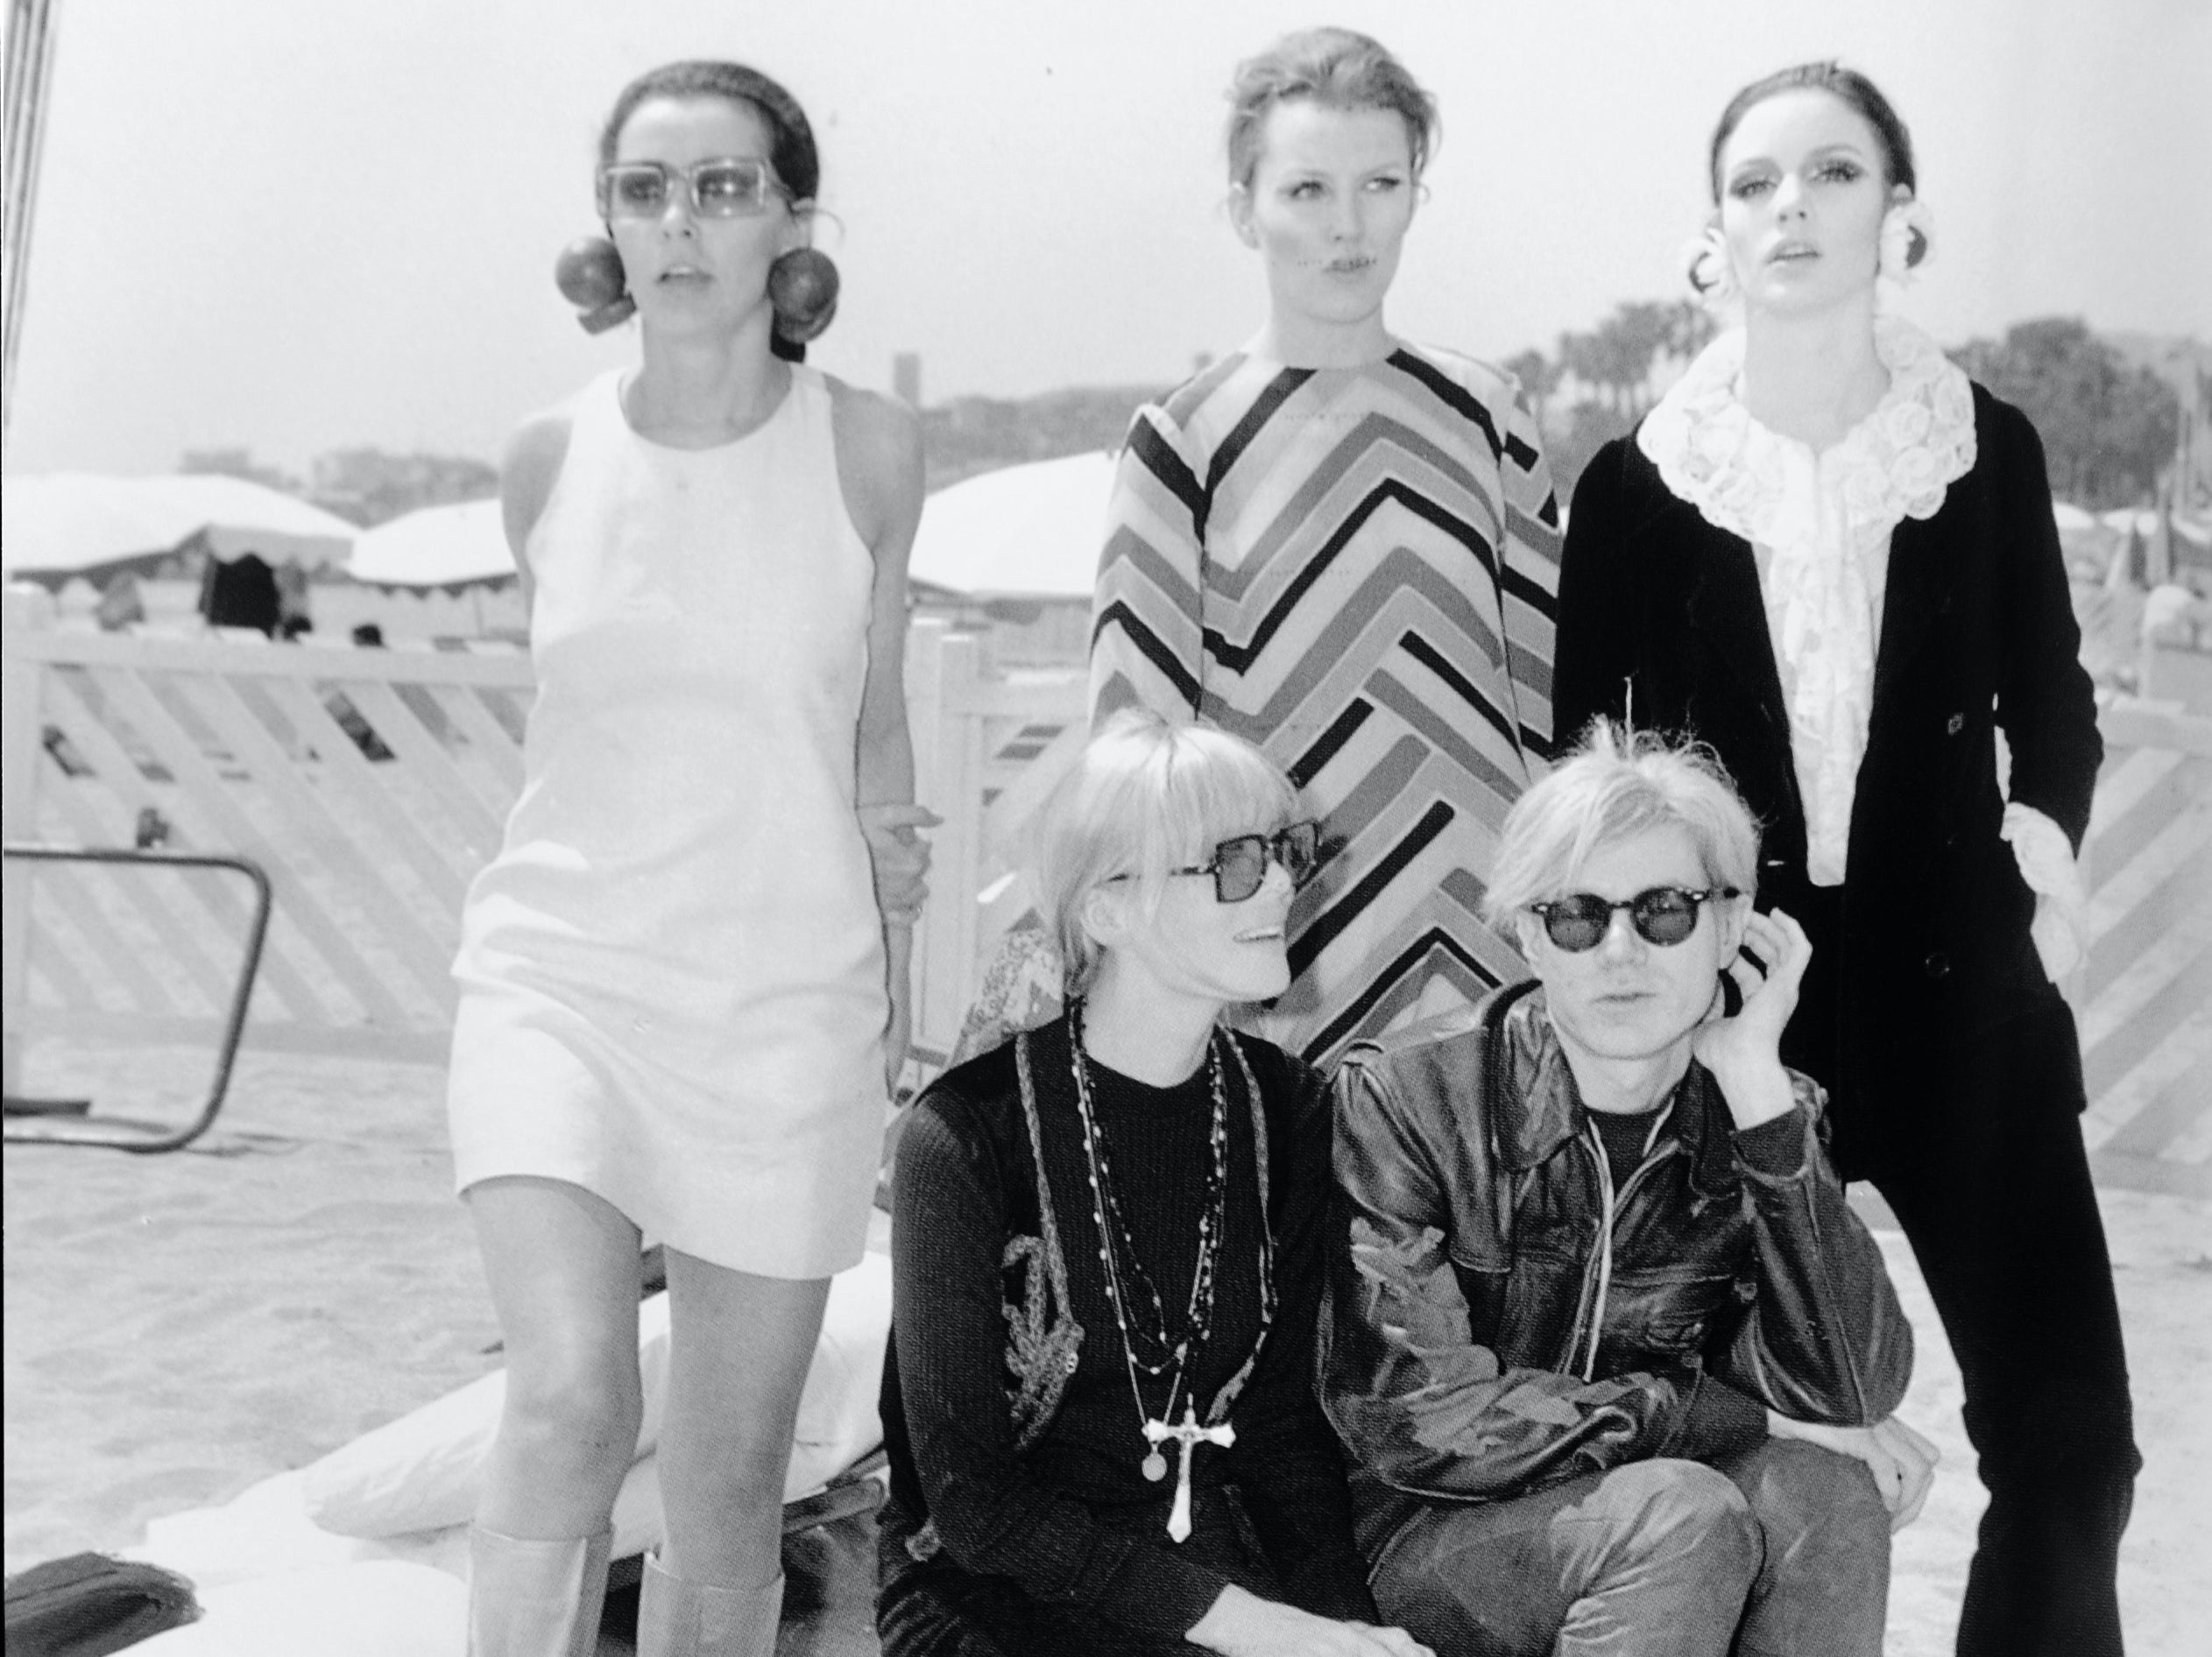 Nico (front left) with Andy Warhol at the Cannes film festival in 1967